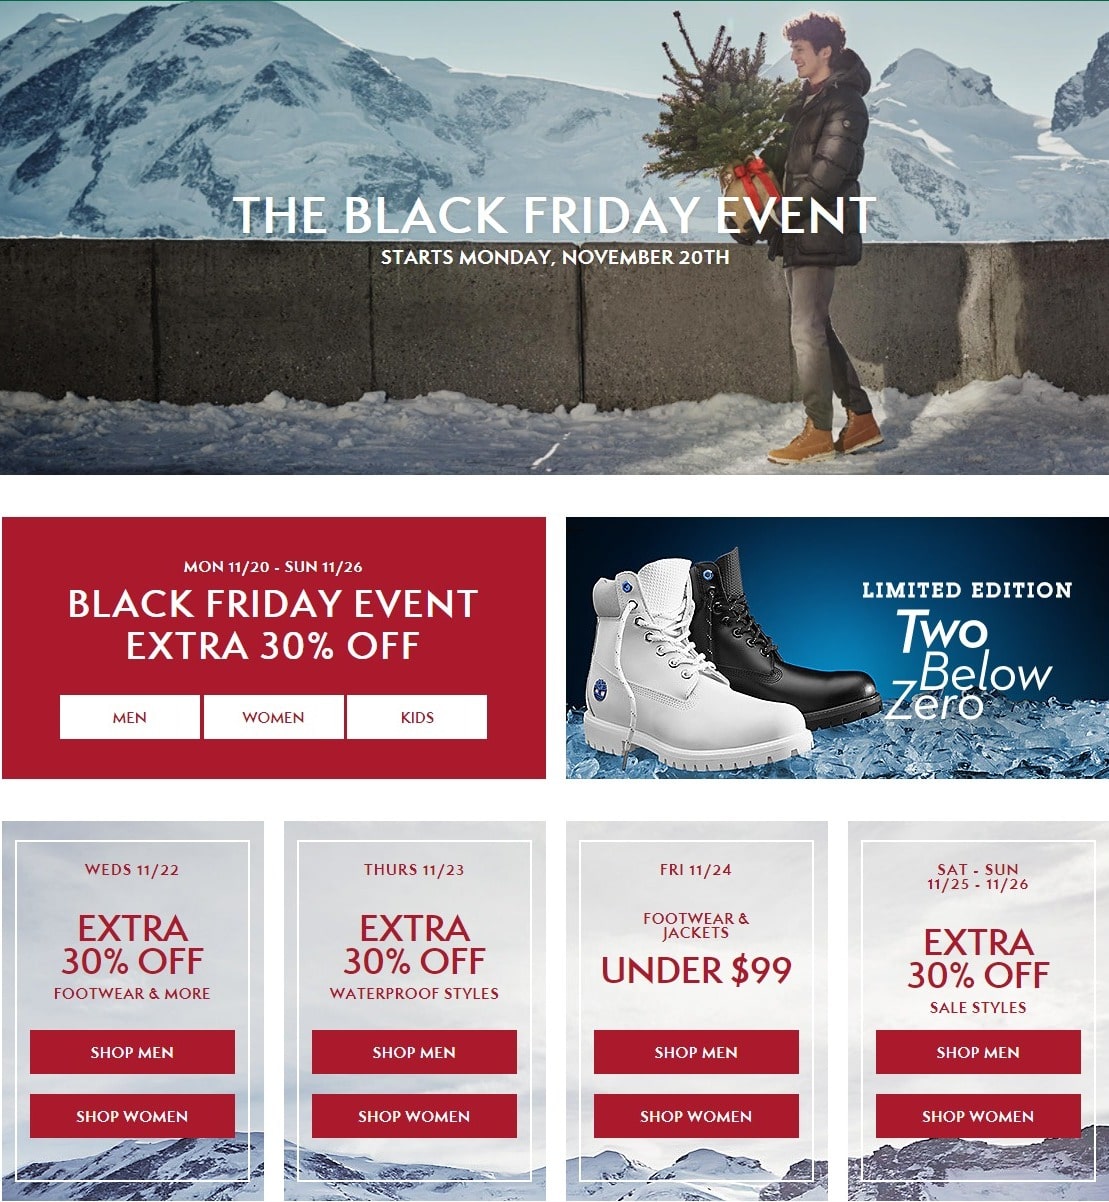 Timberland Black Friday Ad 2017 - Does Timberland Have Black Friday Deals